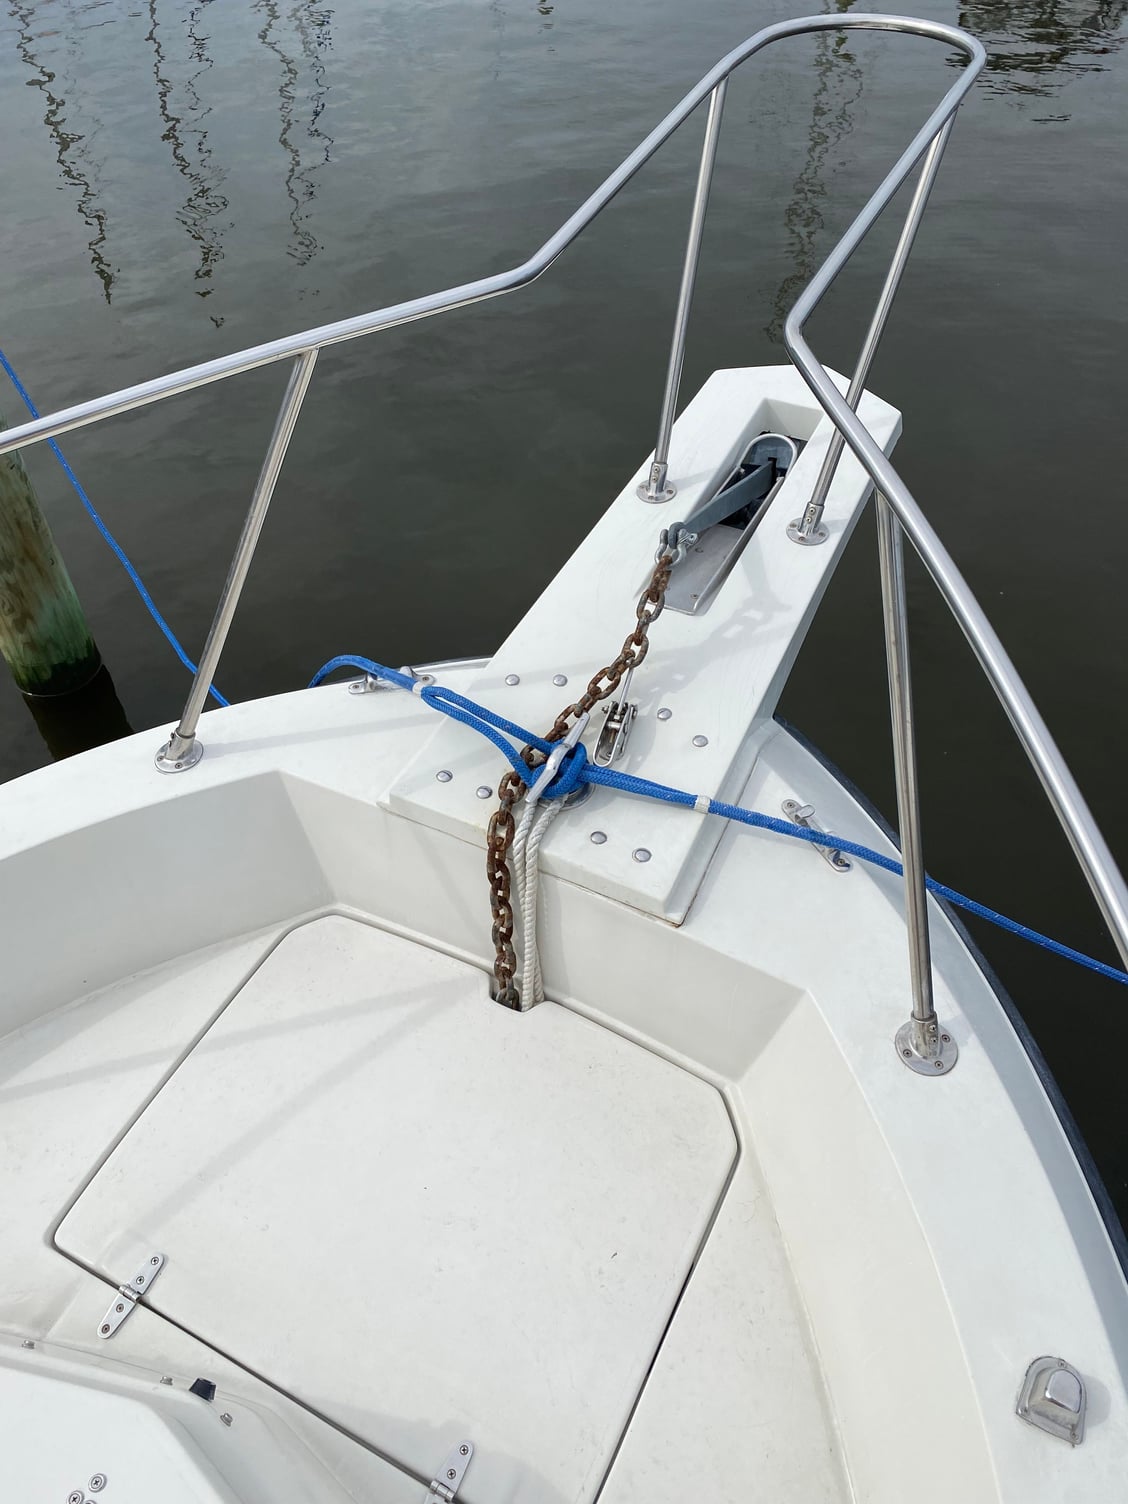 DIY beach anchor - The Hull Truth - Boating and Fishing Forum